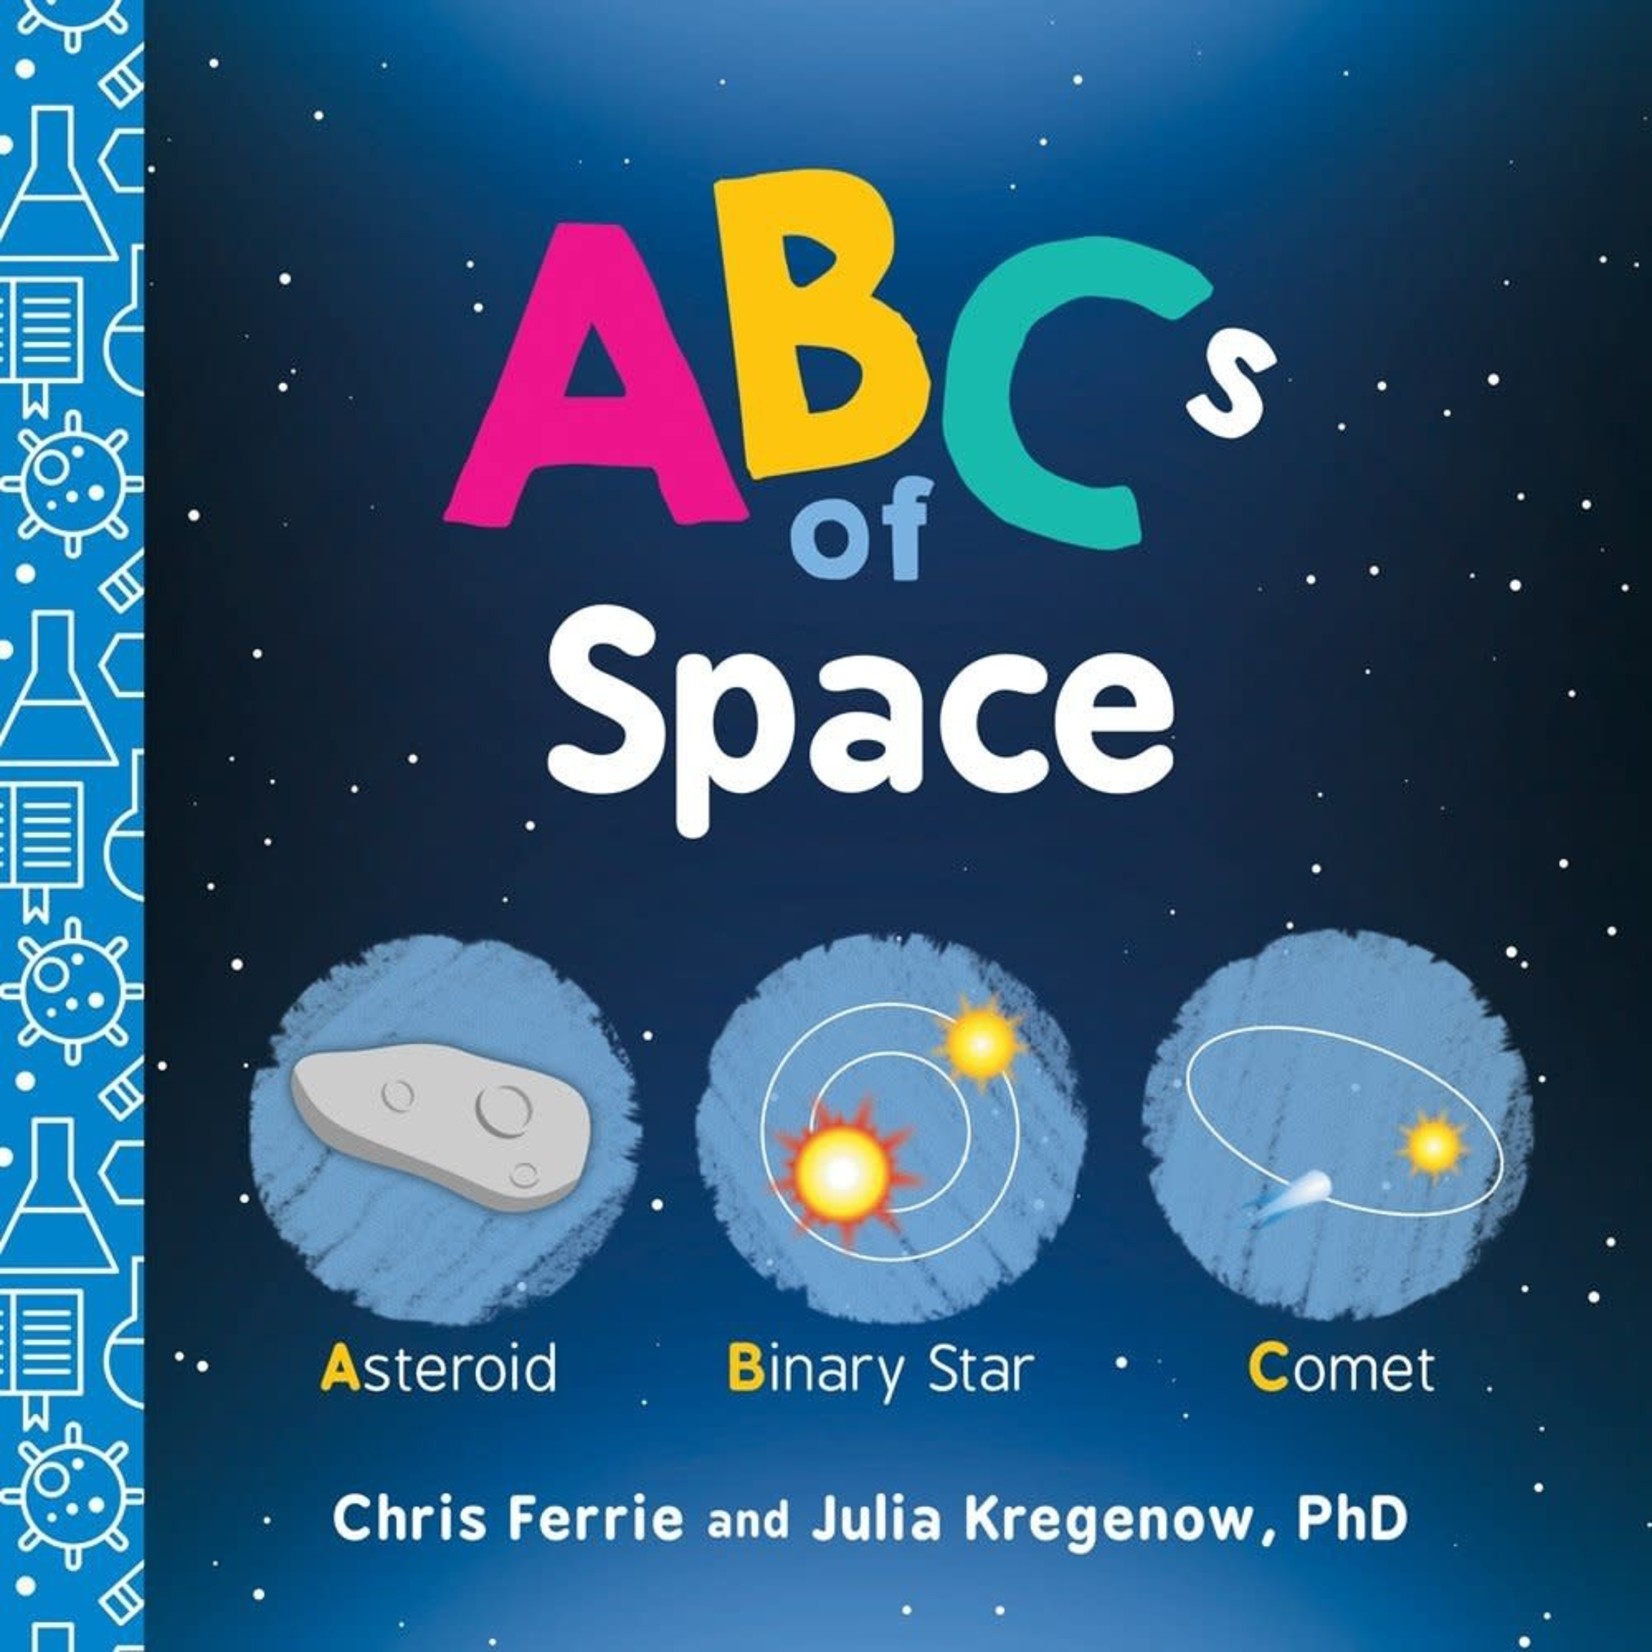 Aviation and Space ABC's of Space